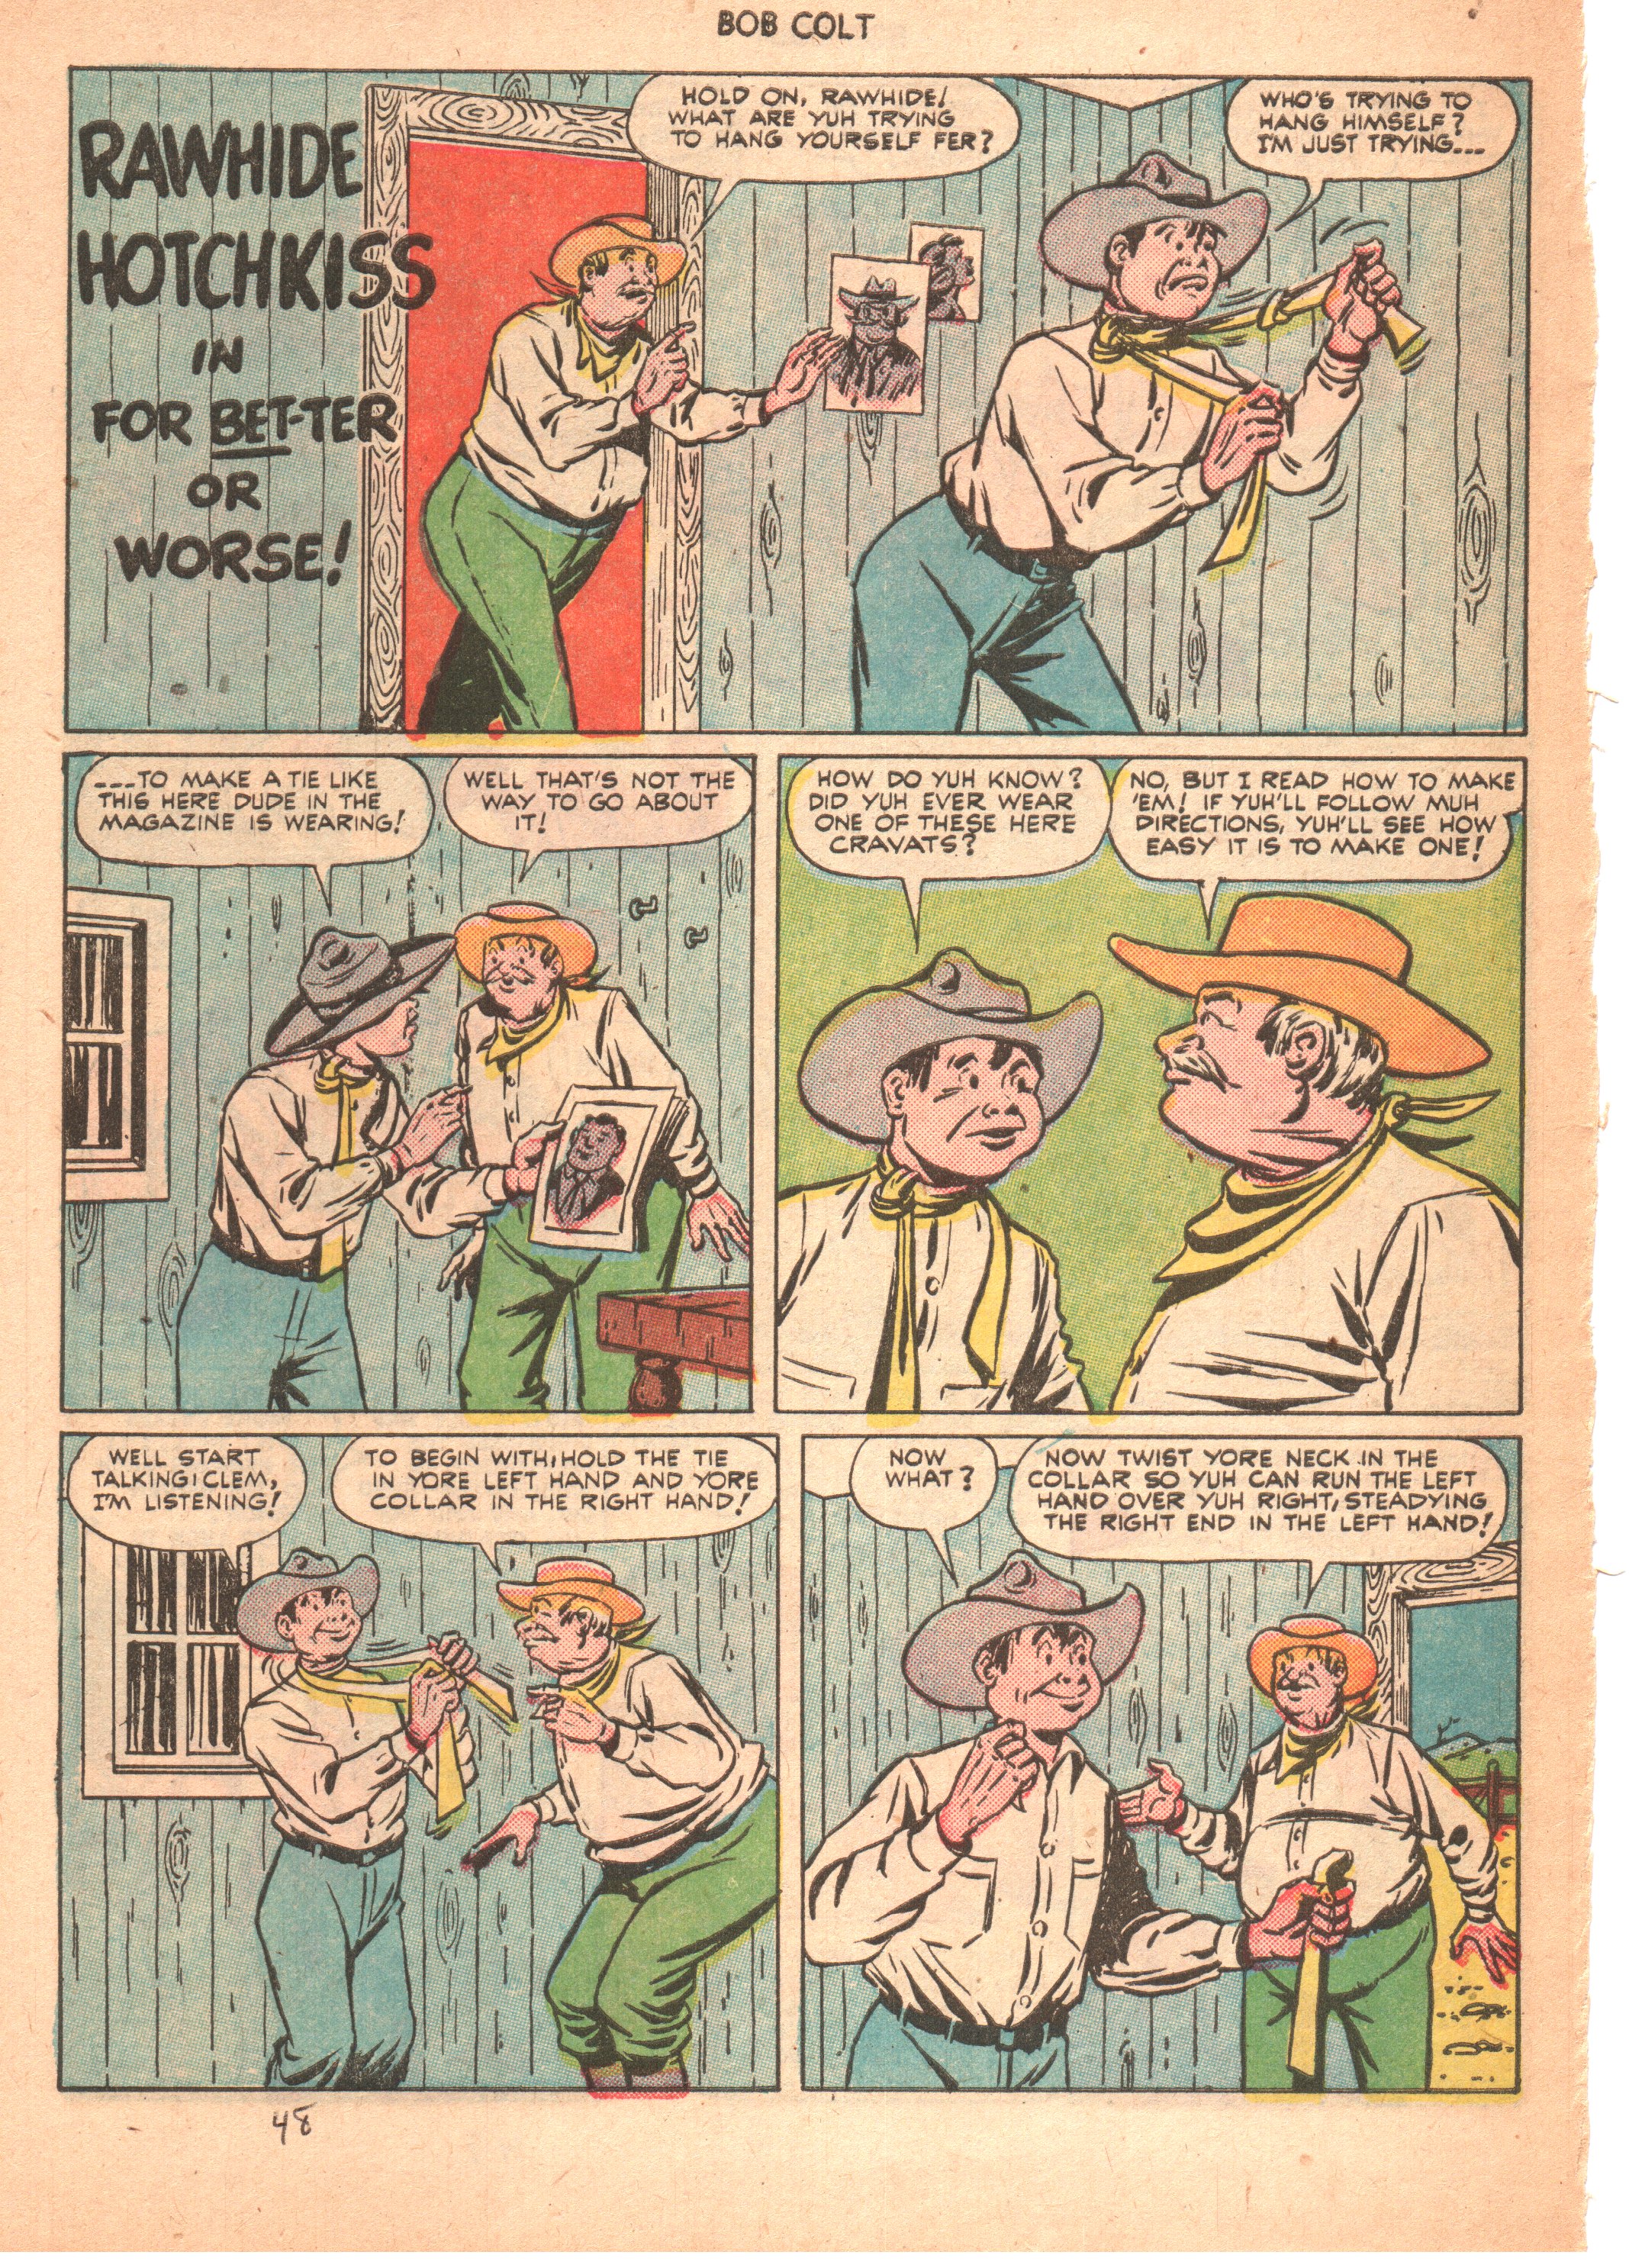 Read online Bob Colt Western comic -  Issue #6 - 15